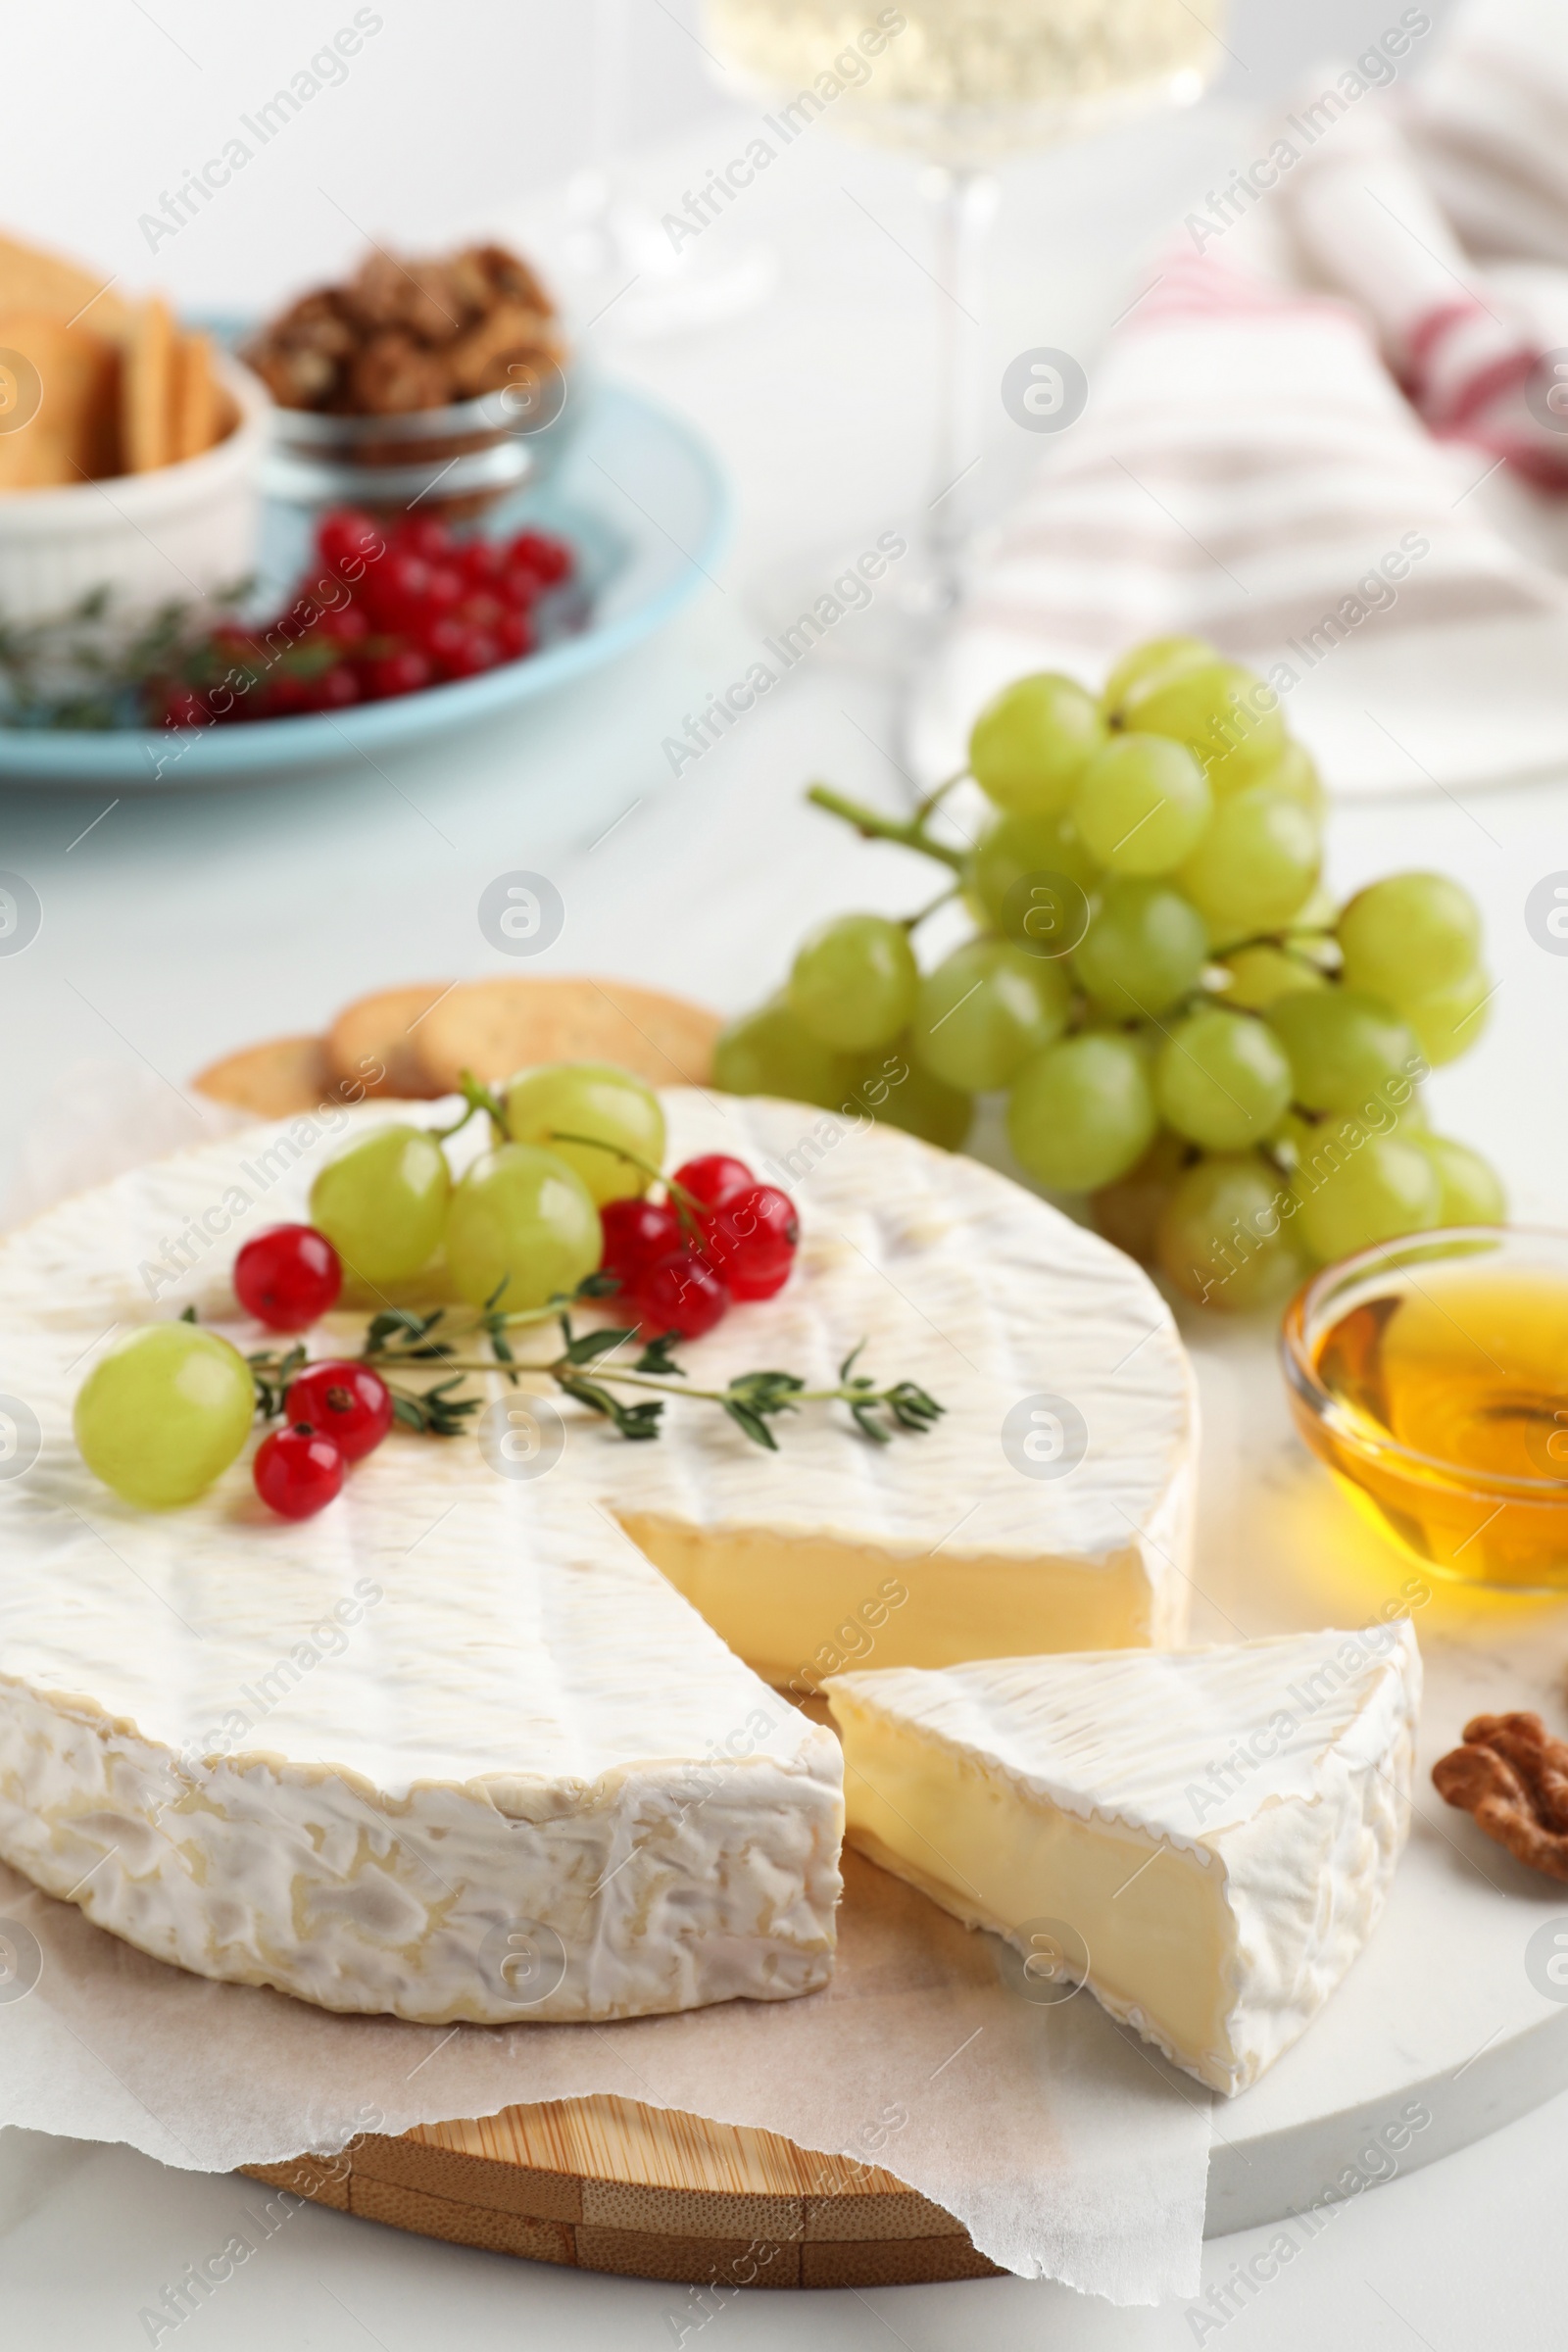 Photo of Brie cheese served with honey and berries on white table, closeup